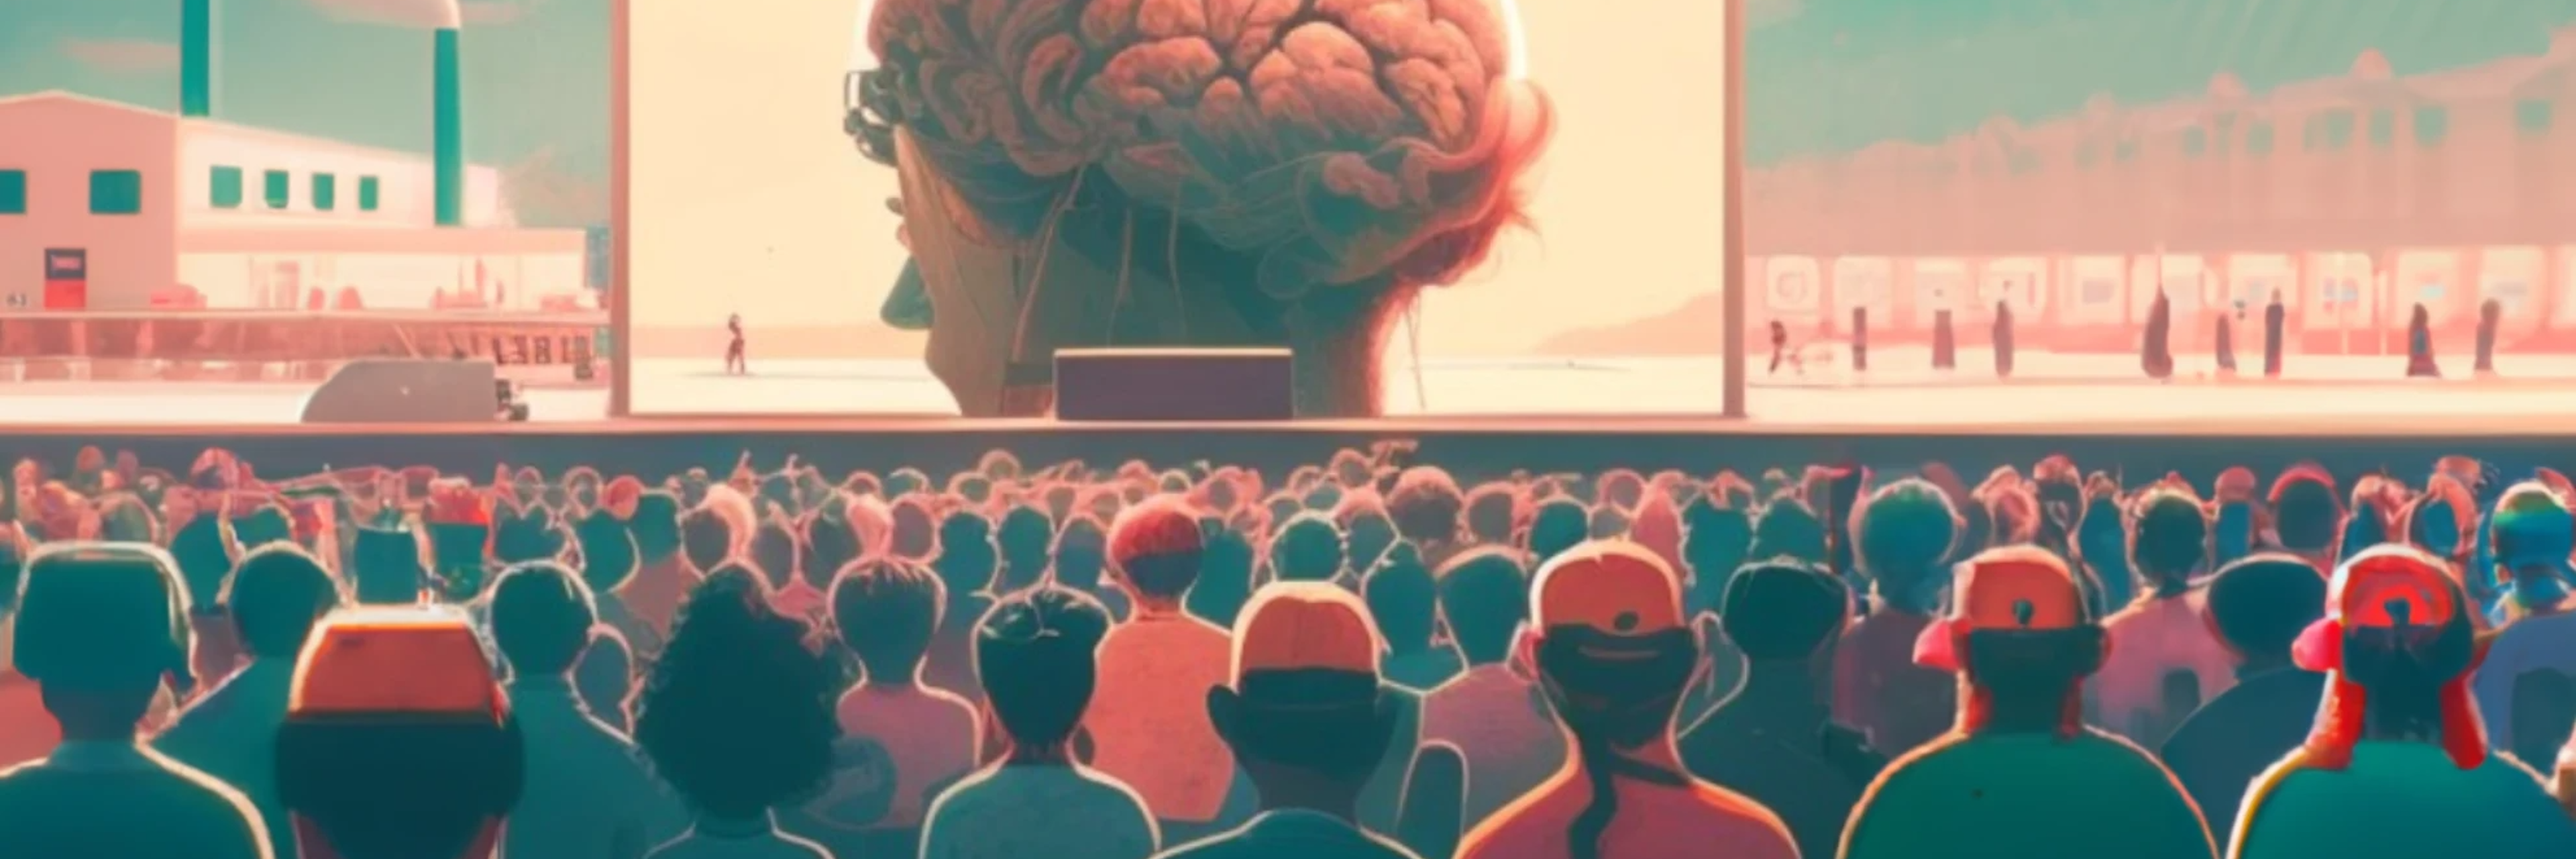 An AI-generated image of a crowd of people looking towards a stage in the distance. On it is a large screen showing a brain.